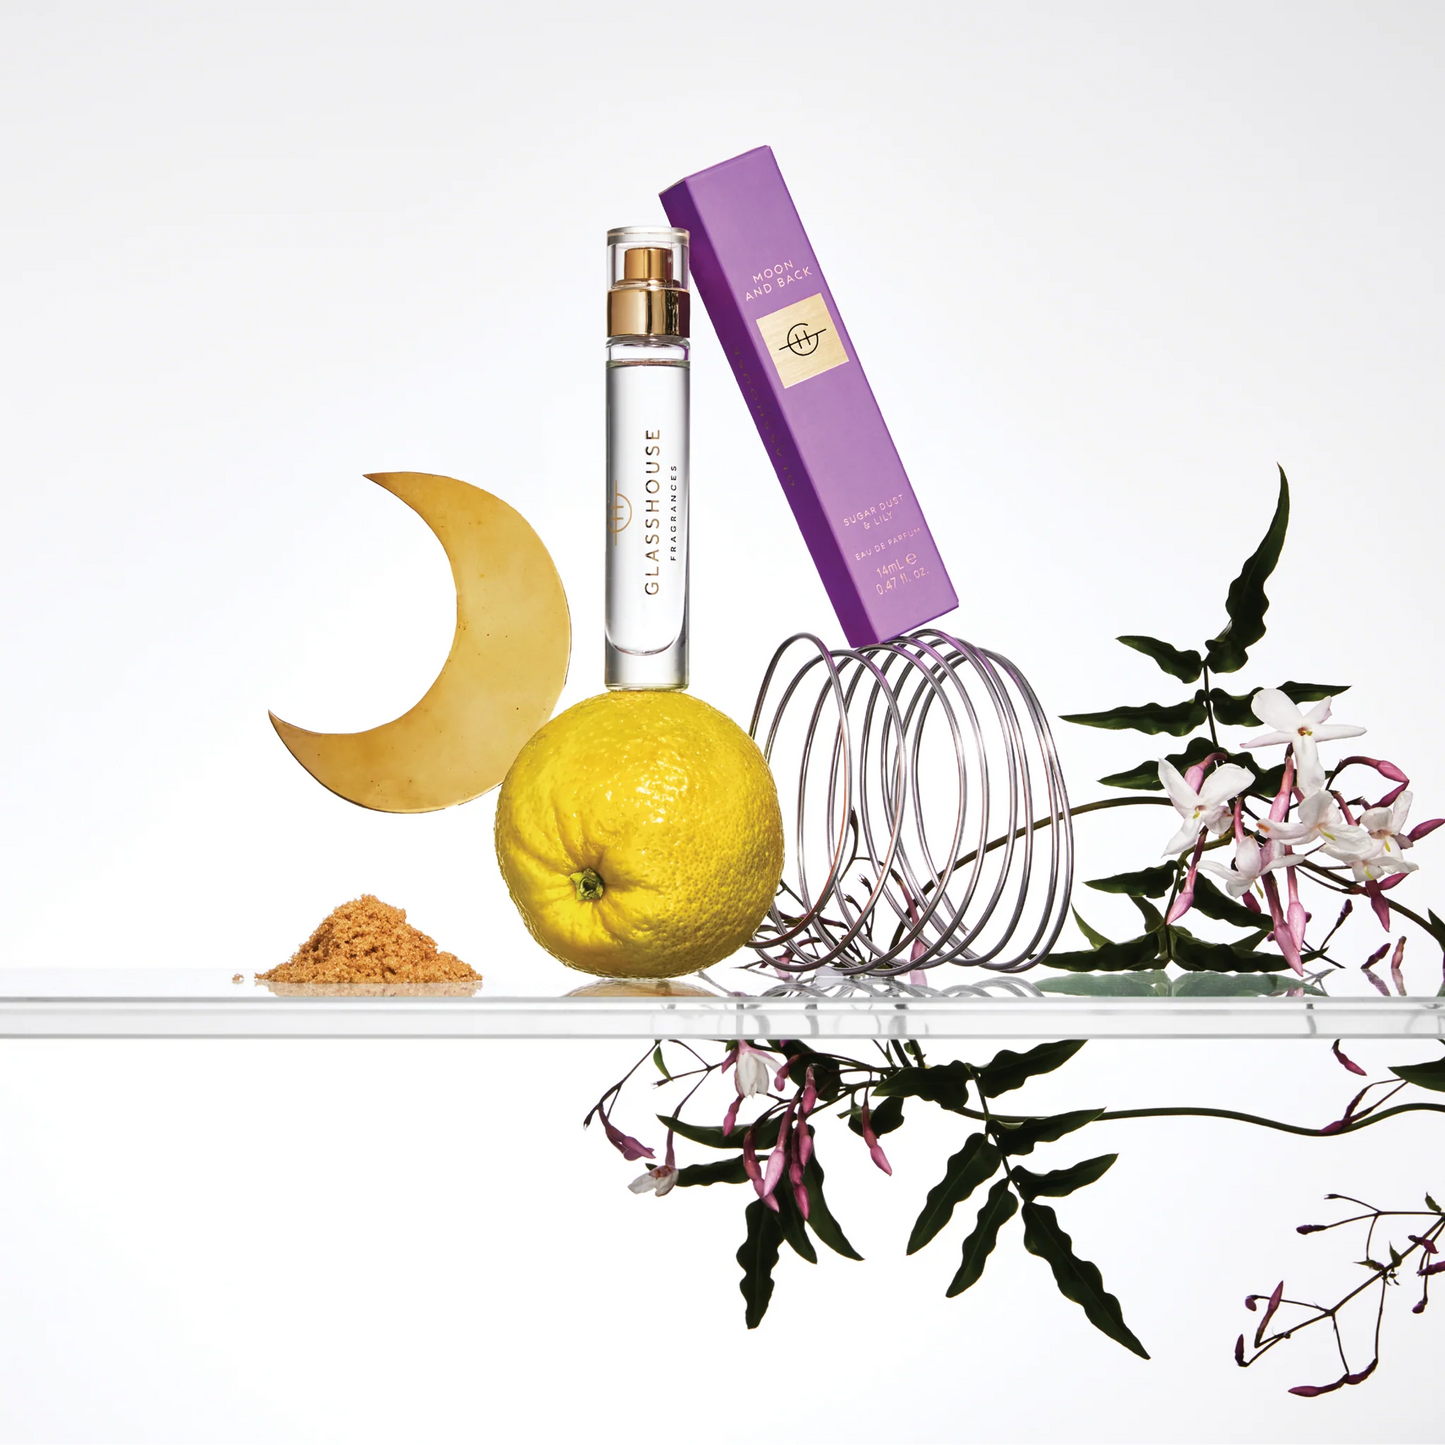 Moon and Back Eau De Parfum and its box arranged with flowers, a lemon, brown sugar, and a cresent moon shape.